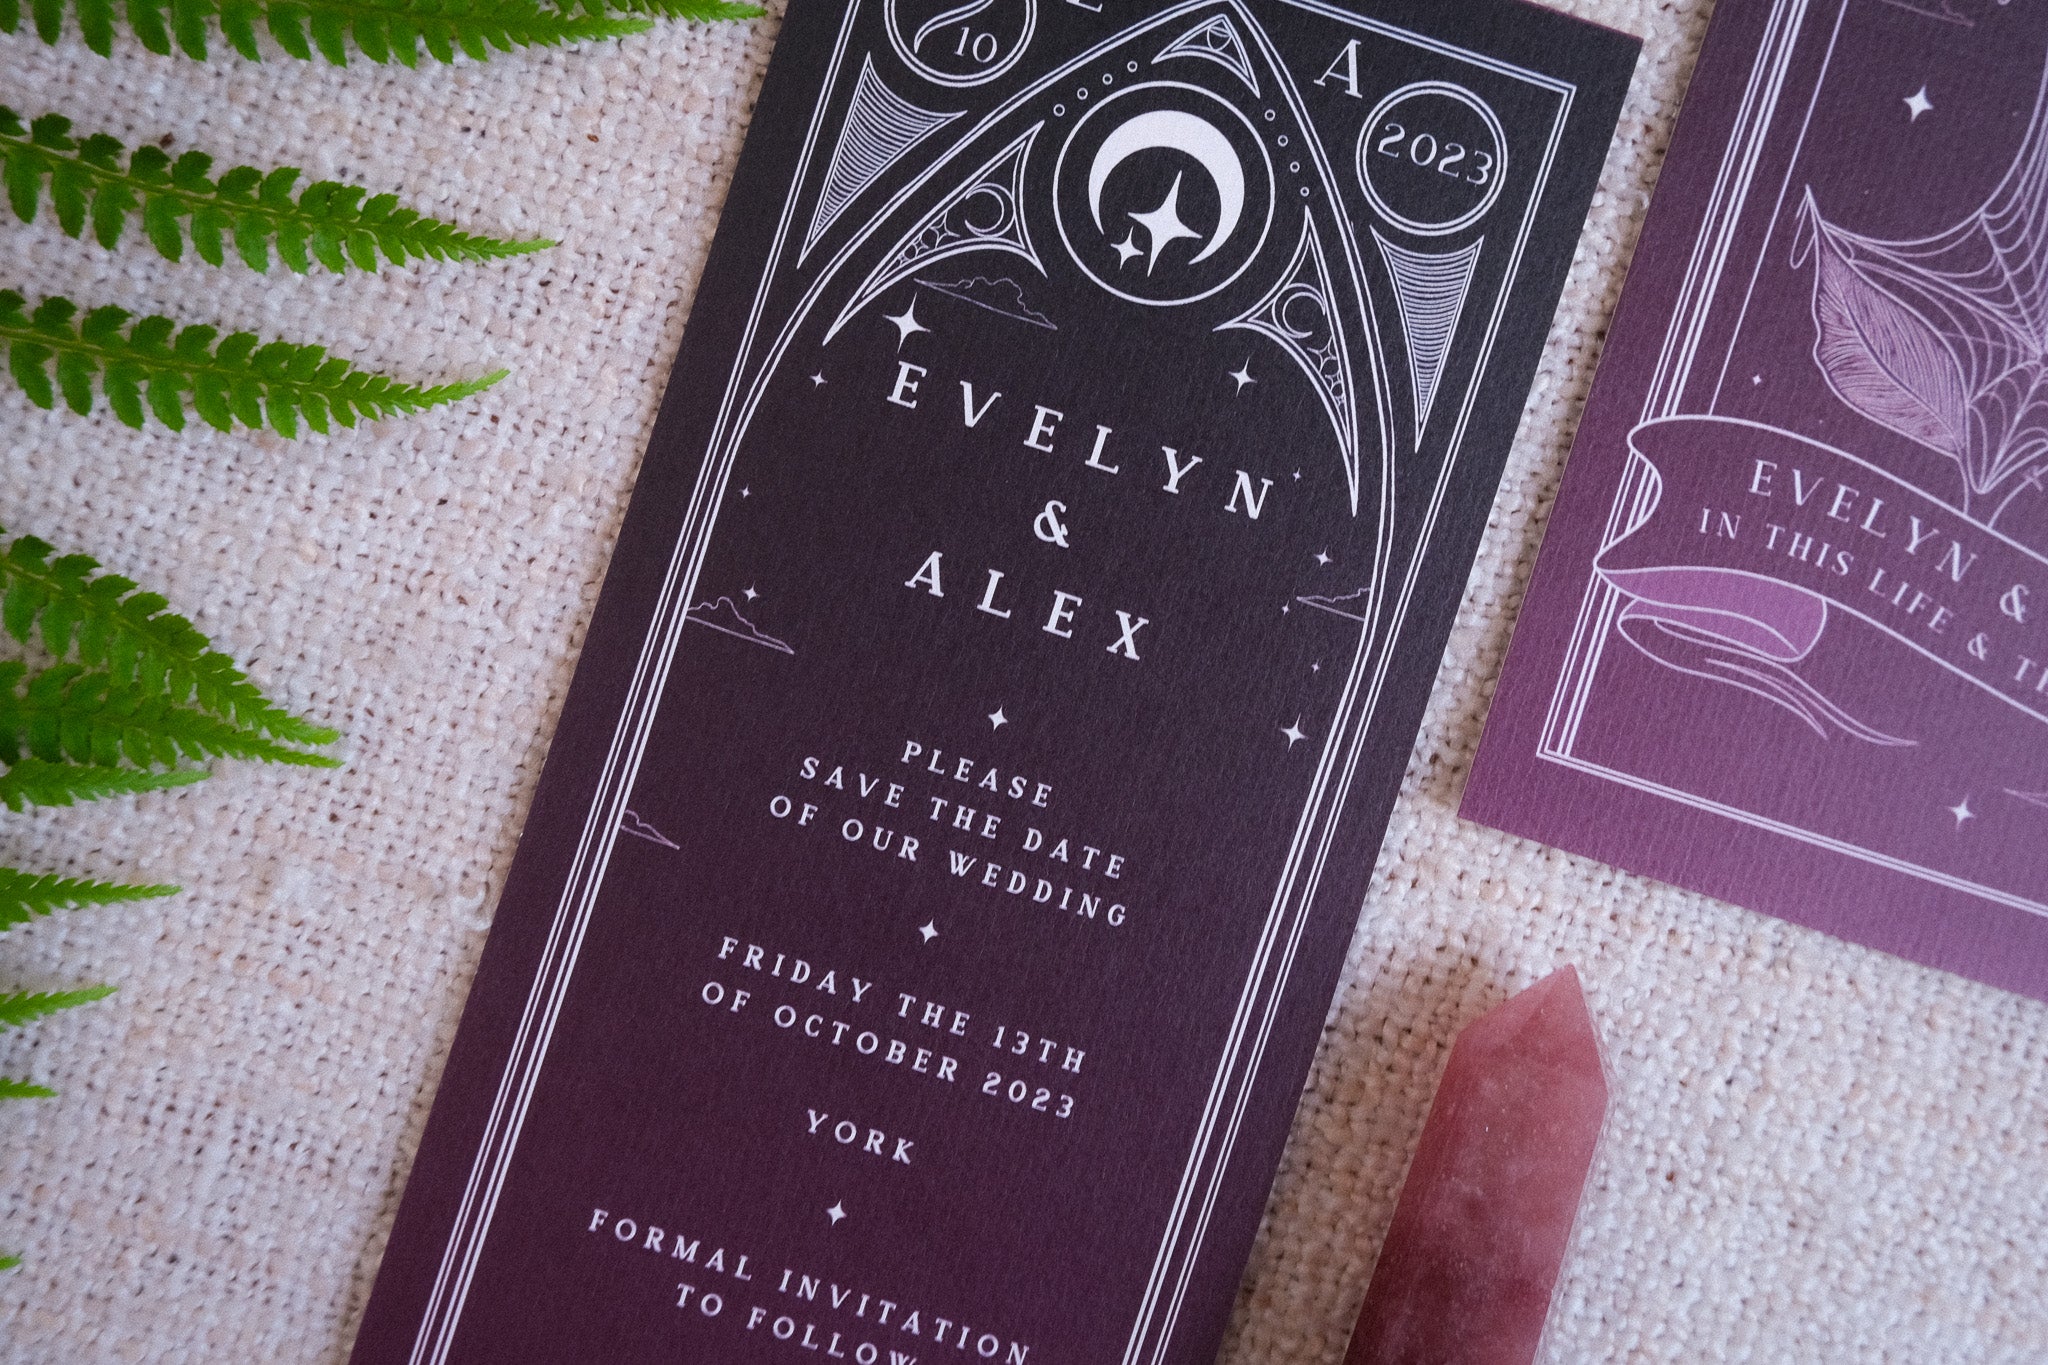 'In This Life & The Next' Black Rose Tarot Save The Date Card